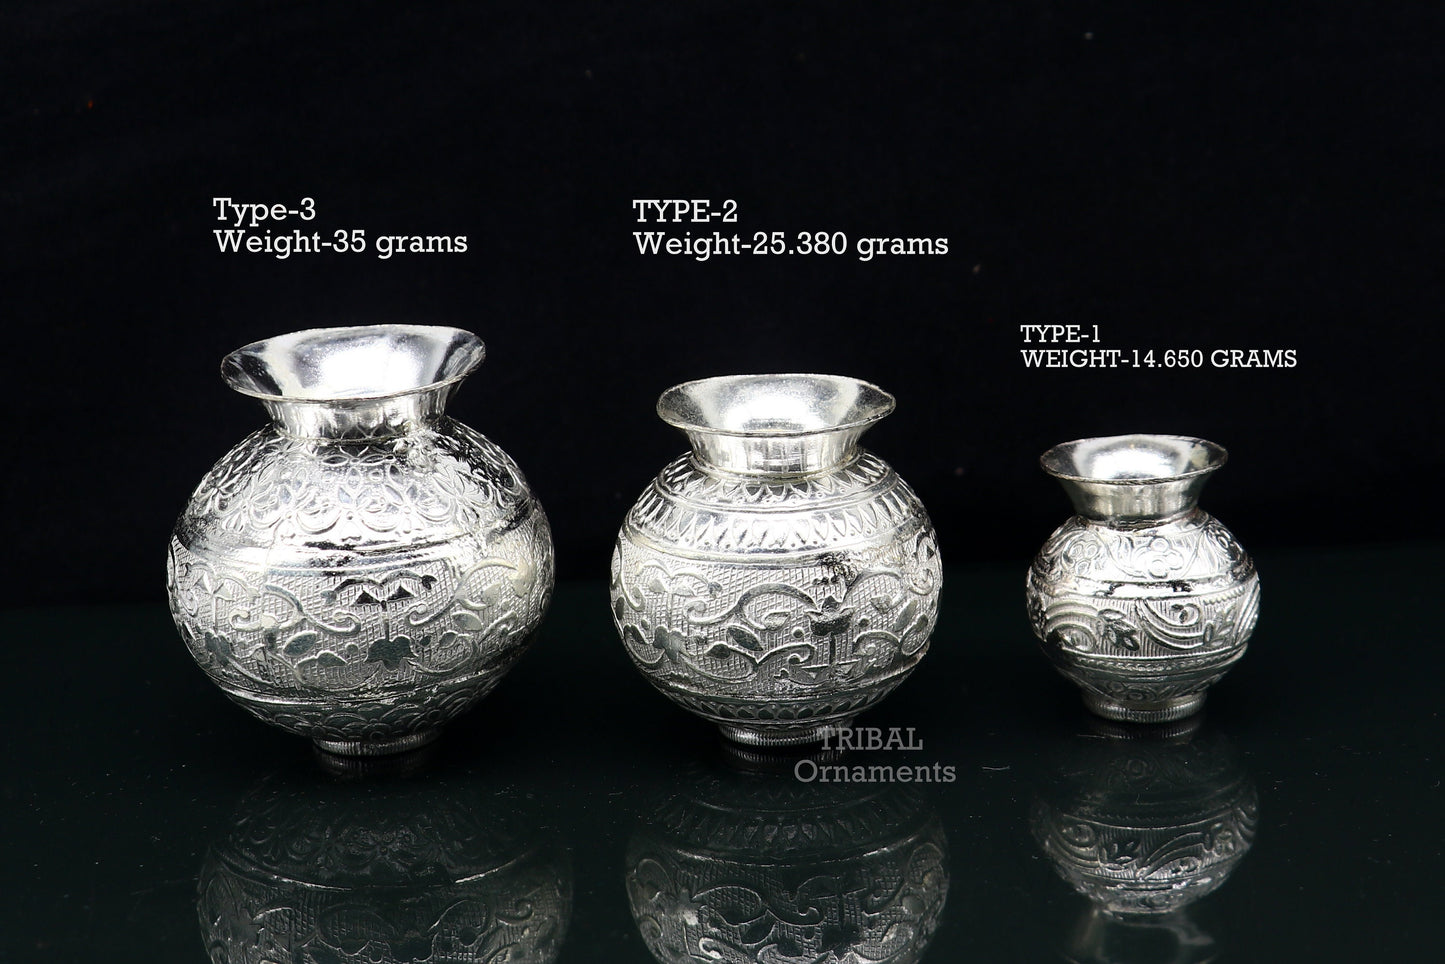 Pure 925 sterling silver handmade plain small Kalash or pot, unique special silver puja article, water or milk kalash pot india su761 - TRIBAL ORNAMENTS